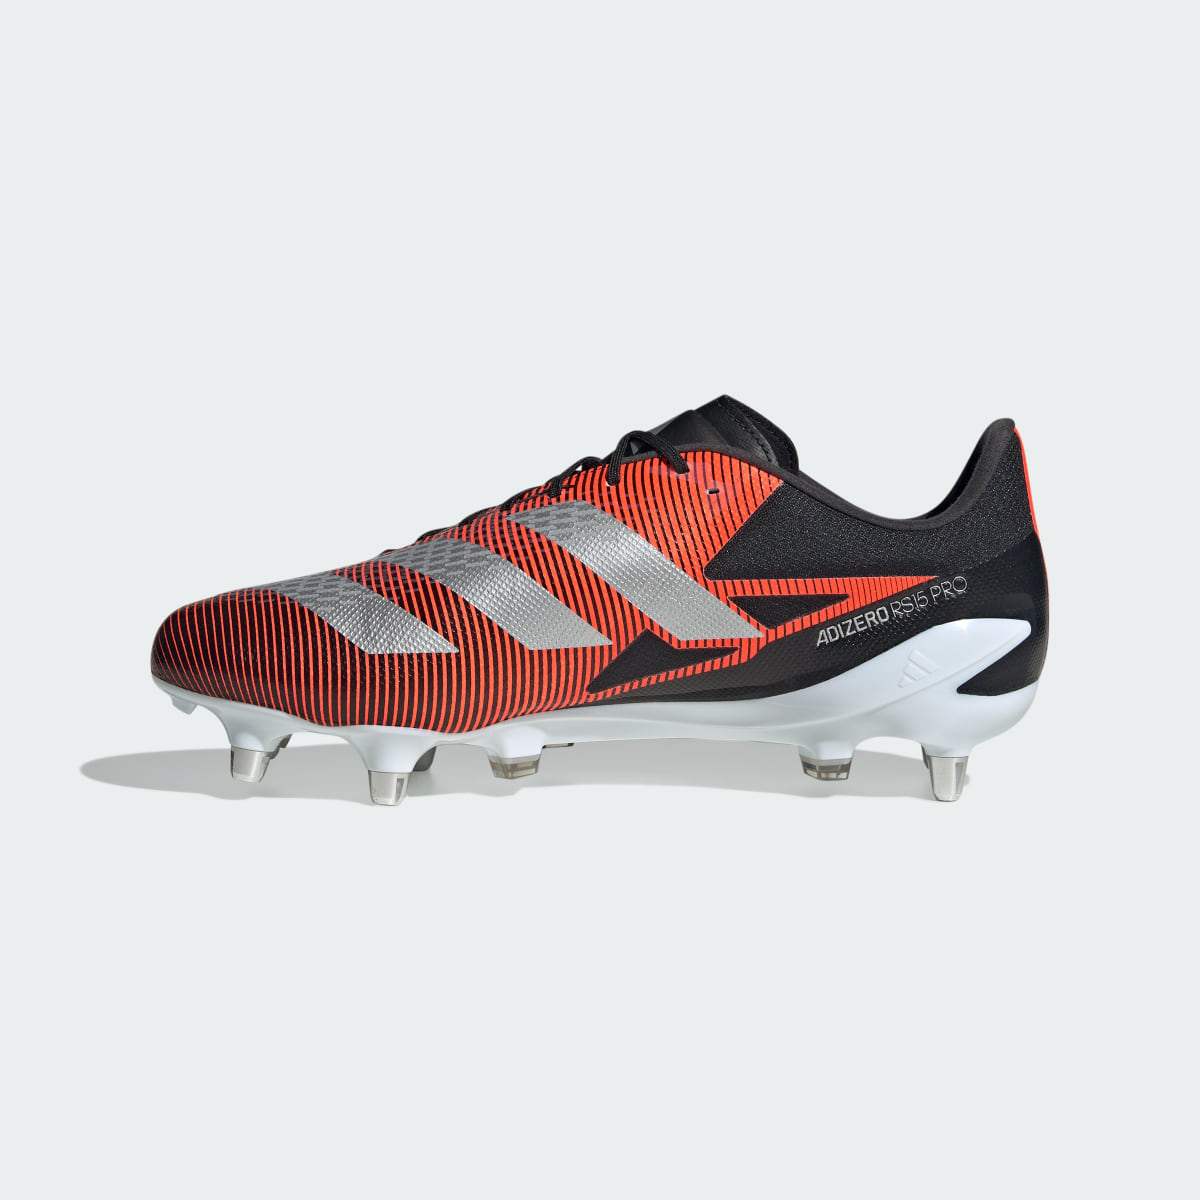 Adidas Adizero RS15 Pro Soft Ground Rugby Boots. 11